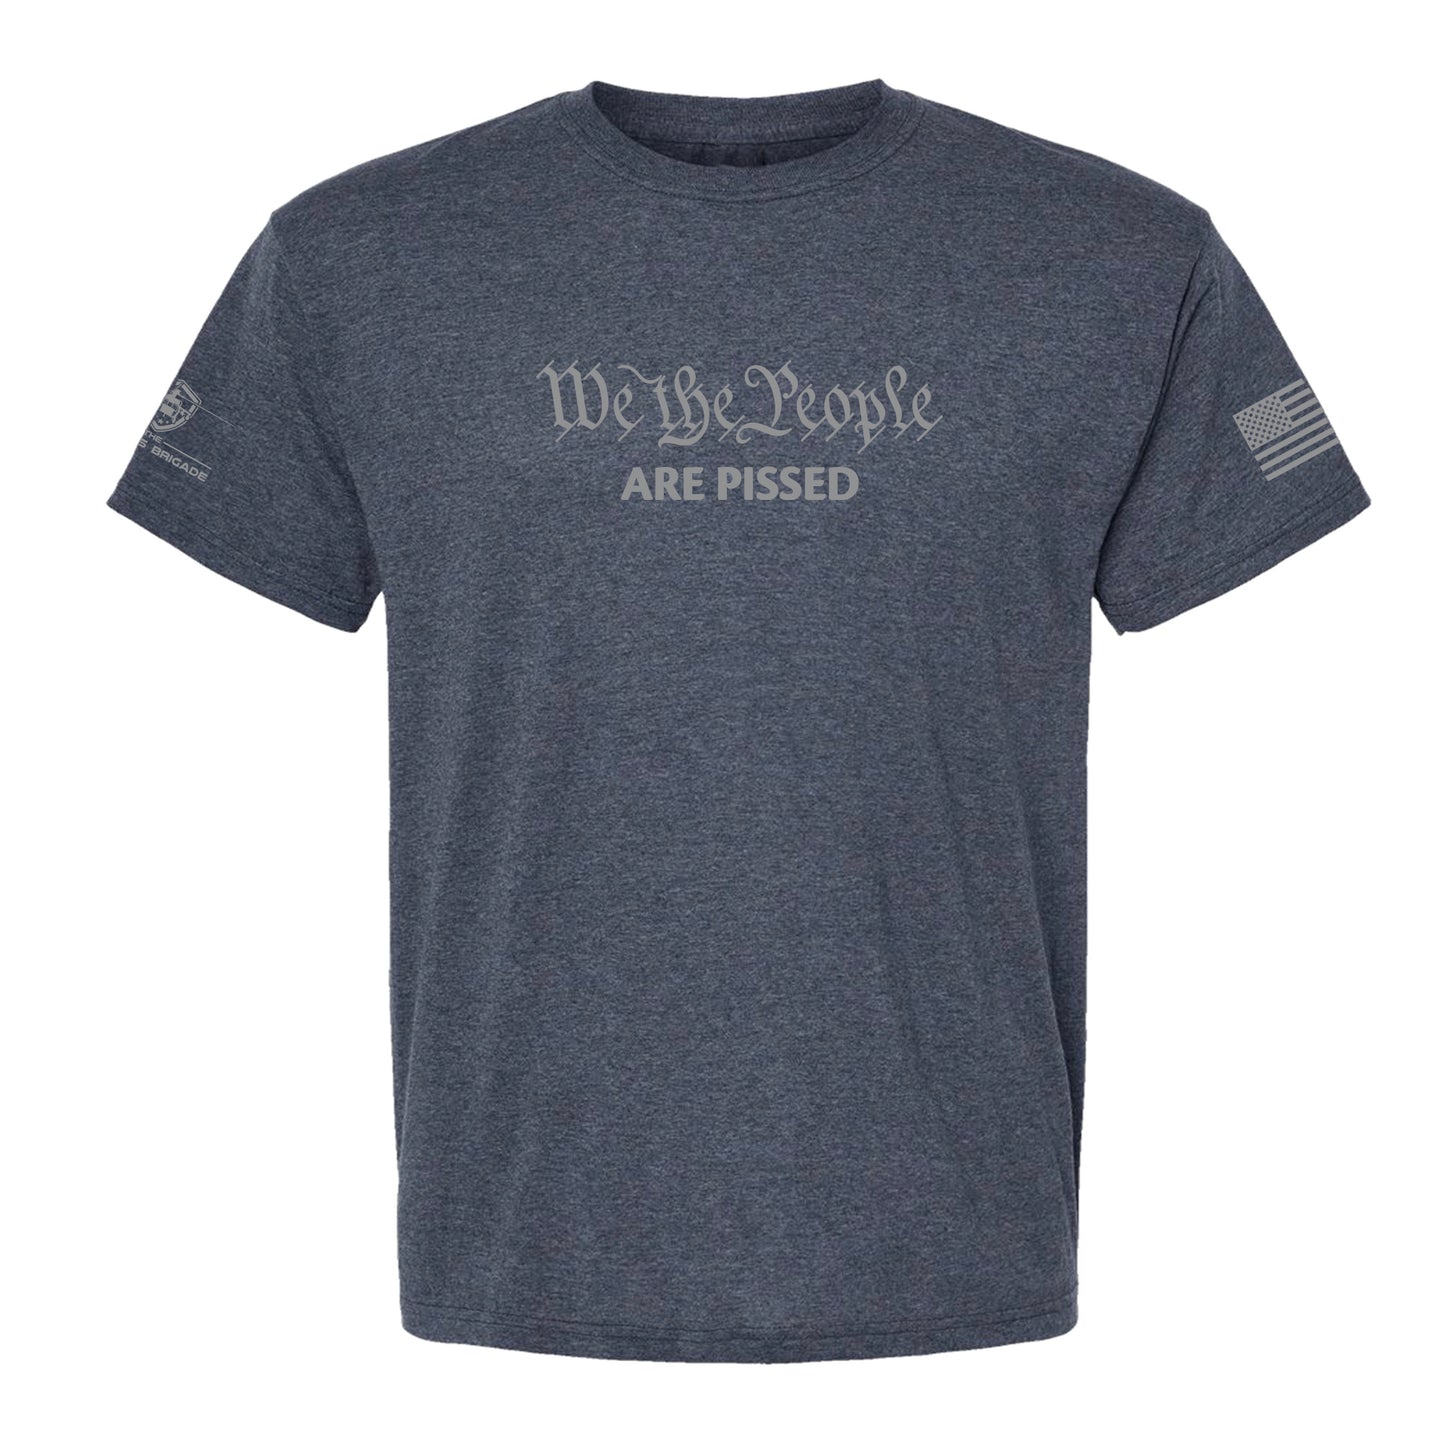 We The People Are Pissed T-shirt